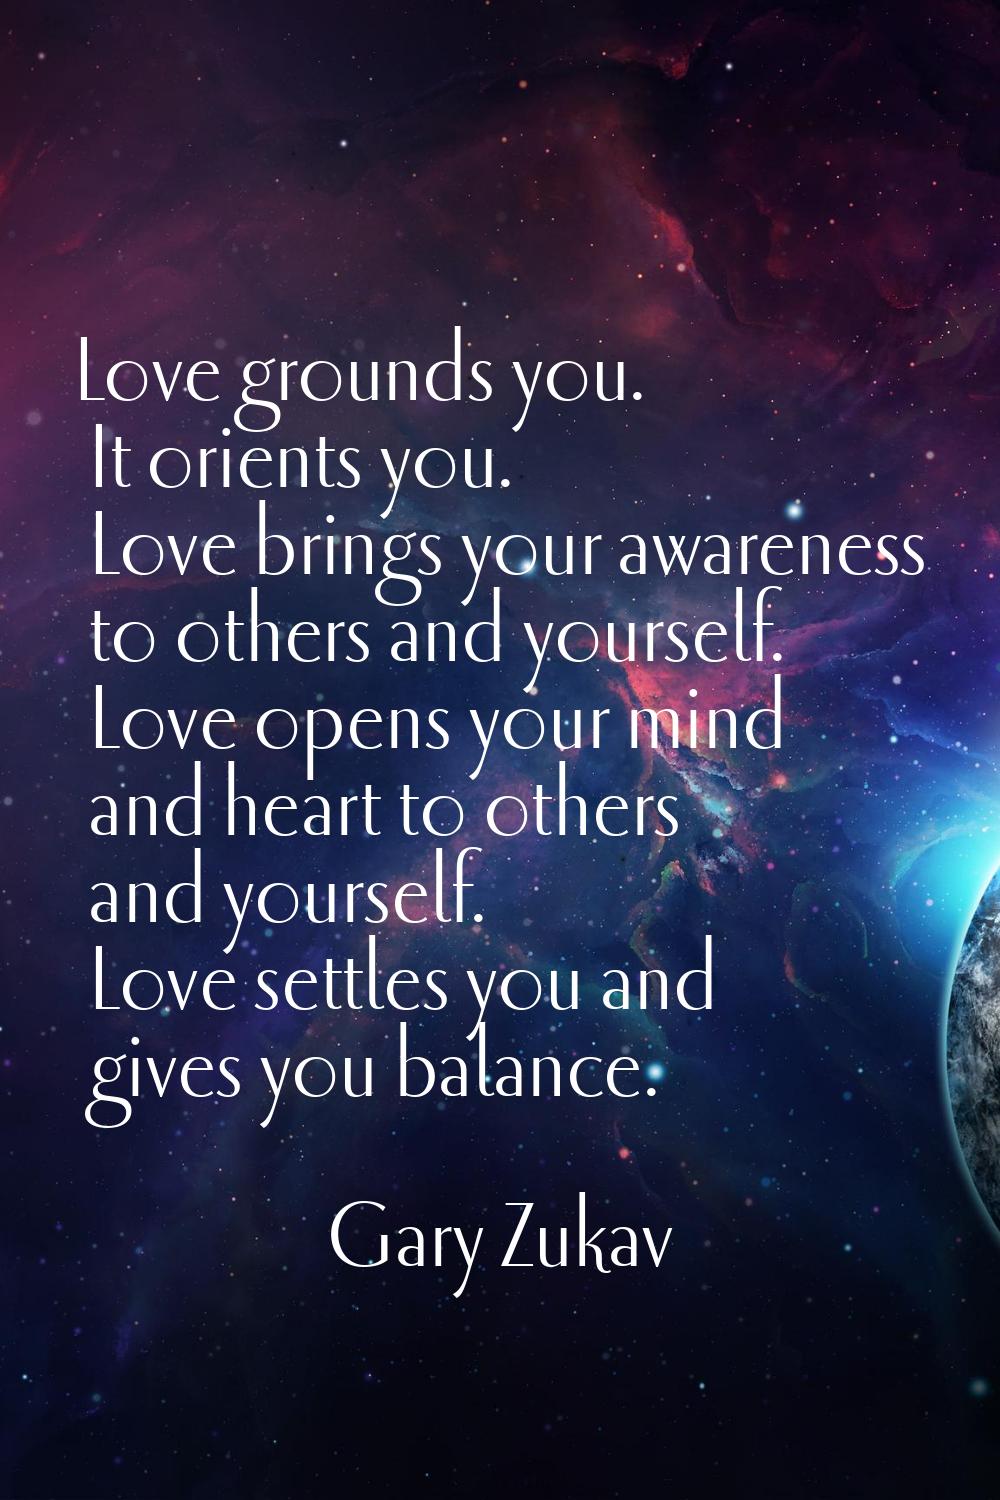 Love grounds you. It orients you. Love brings your awareness to others and yourself. Love opens you